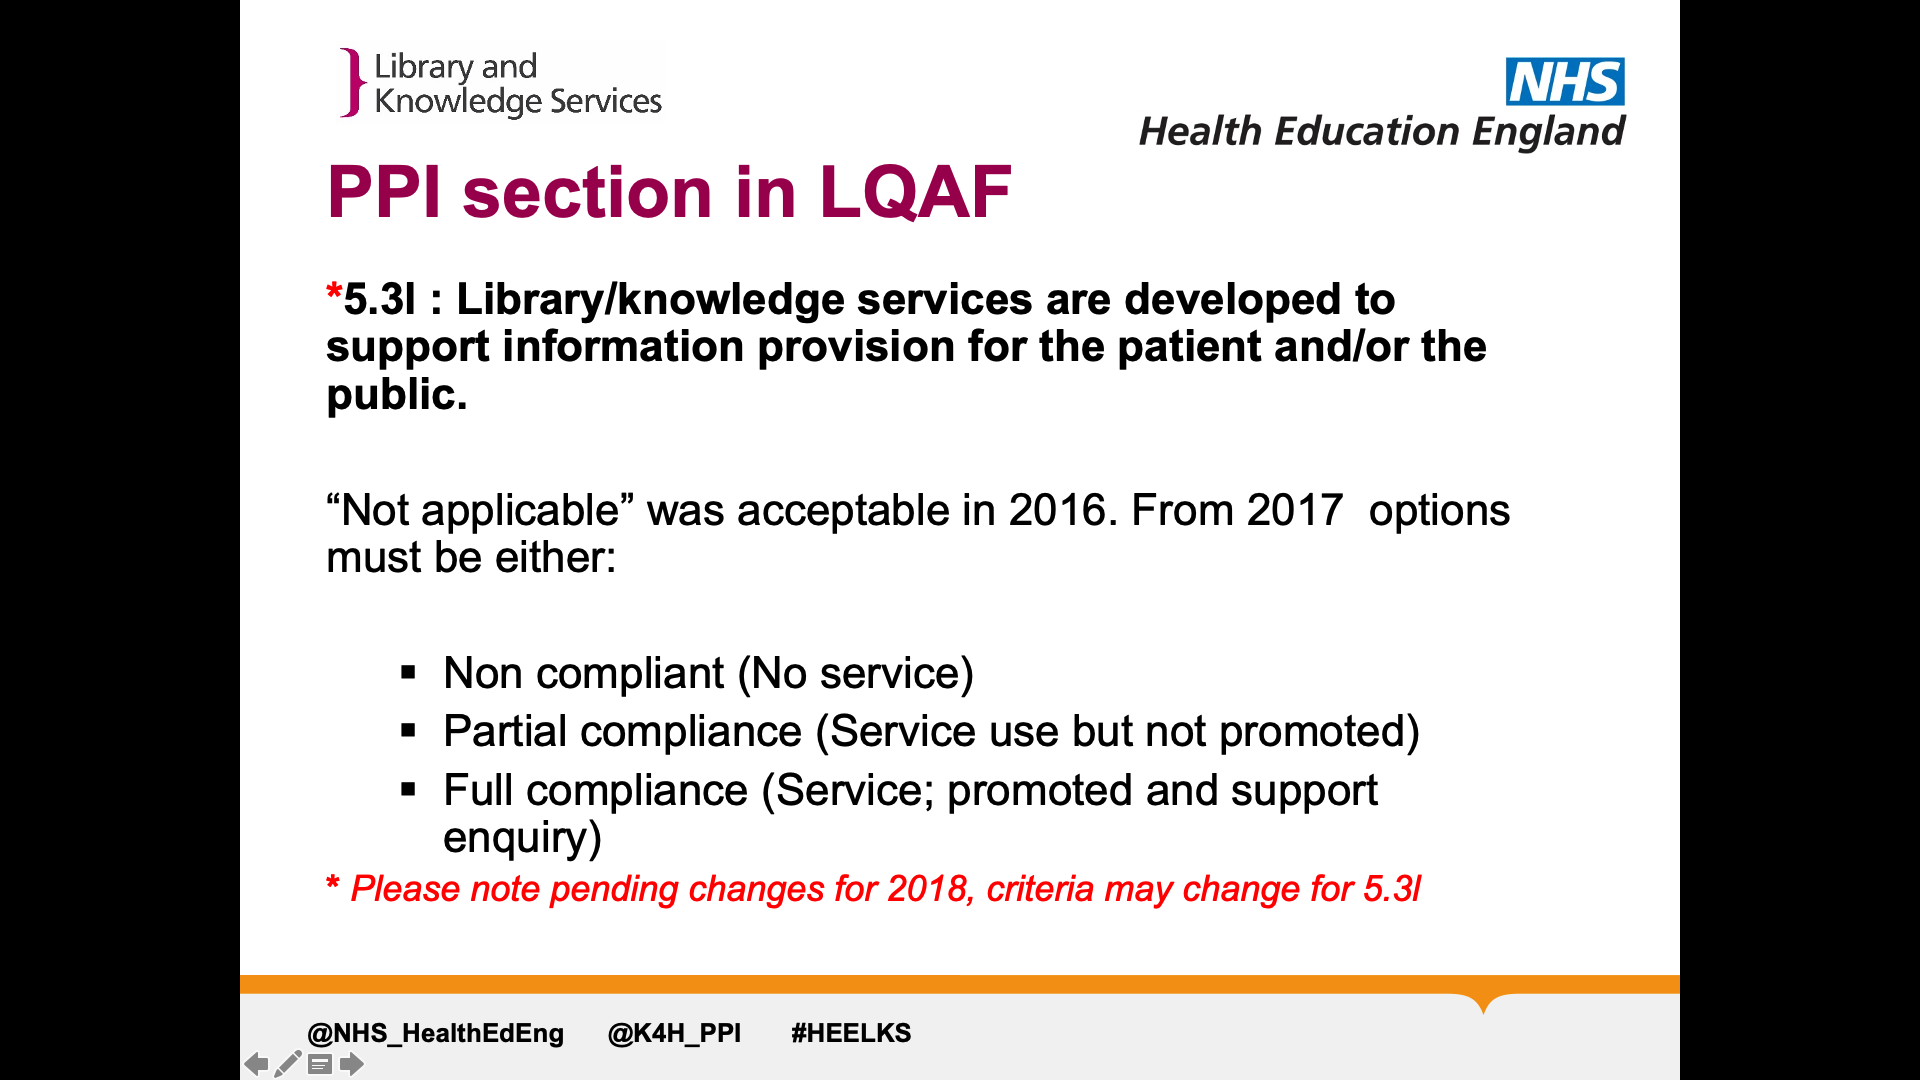 Title: PPI section in LQAF. Text on page: *5.3l : Library/knowledge services are developed to support information provision for the patient and/or the public.  “Not applicable” was acceptable in 2016. From 2017  options must be either:  Non compliant (No service) Partial compliance (Service use but not promoted) Full compliance (Service; promoted and support enquiry) * Please note pending changes for 2018, criteria may change for 5.3l